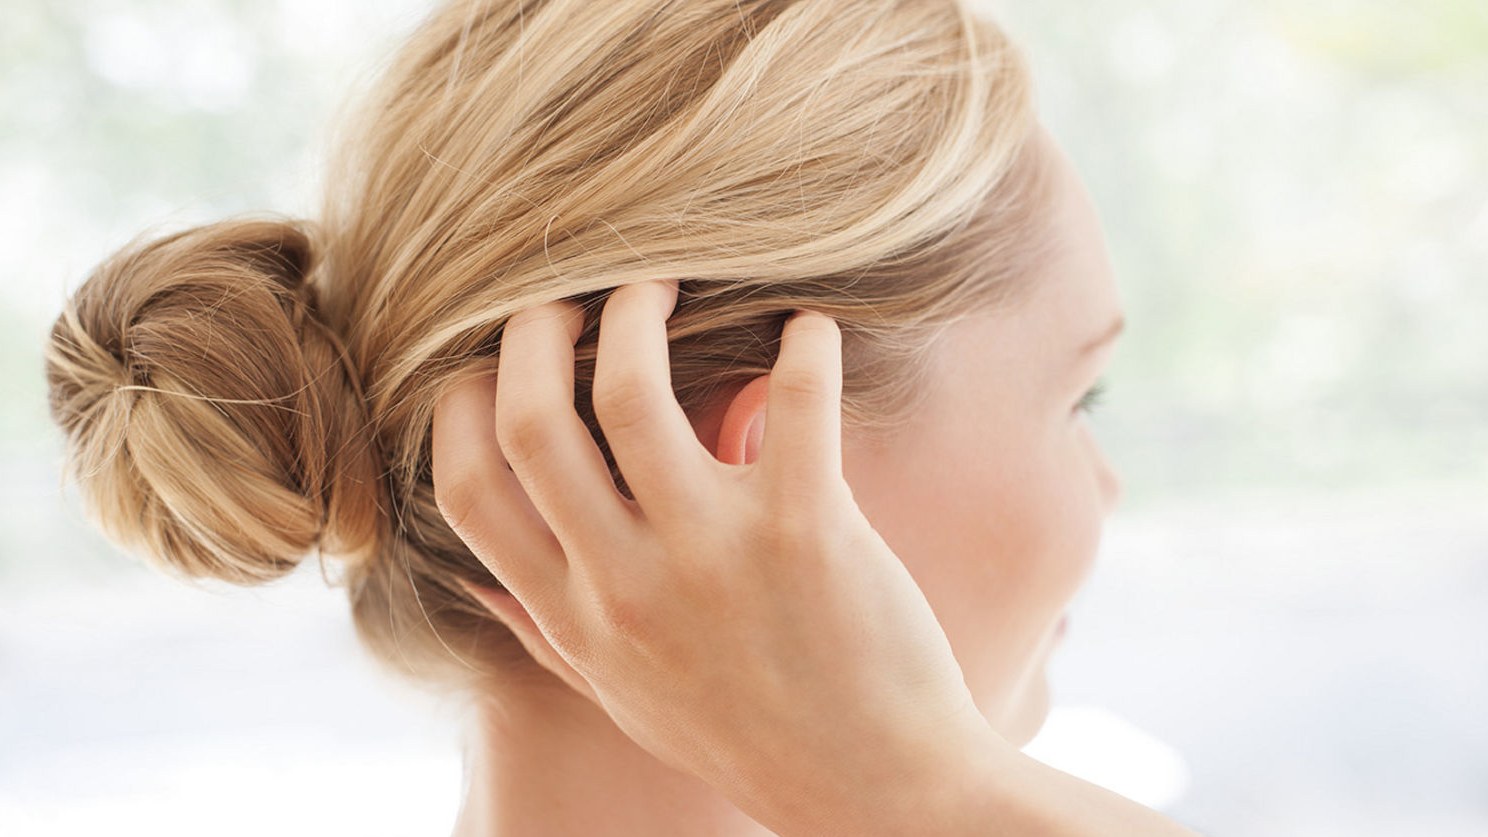 What Is Itchy Scalp And What Can You Do About It?